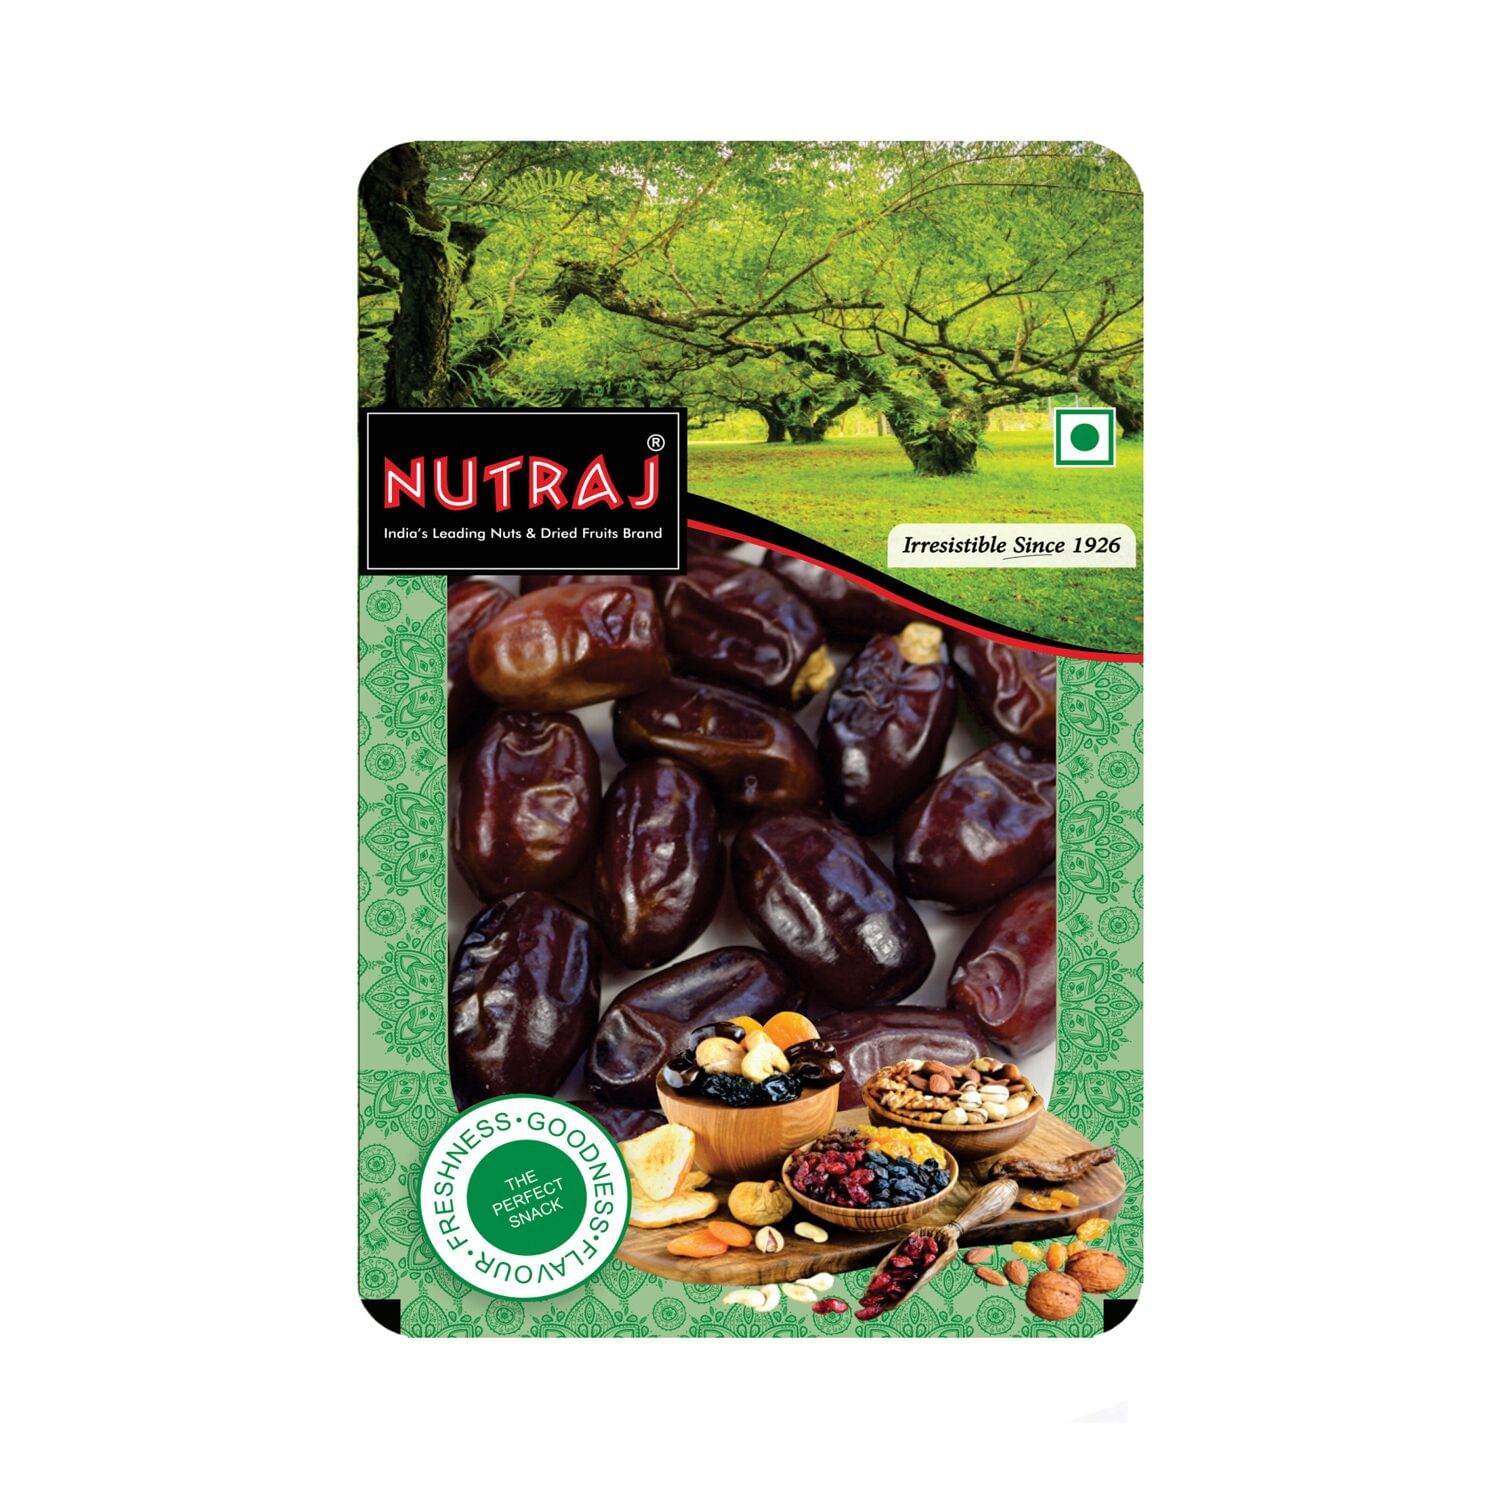 Nutraj Figs and Dates Tray - 400g (200g Each)